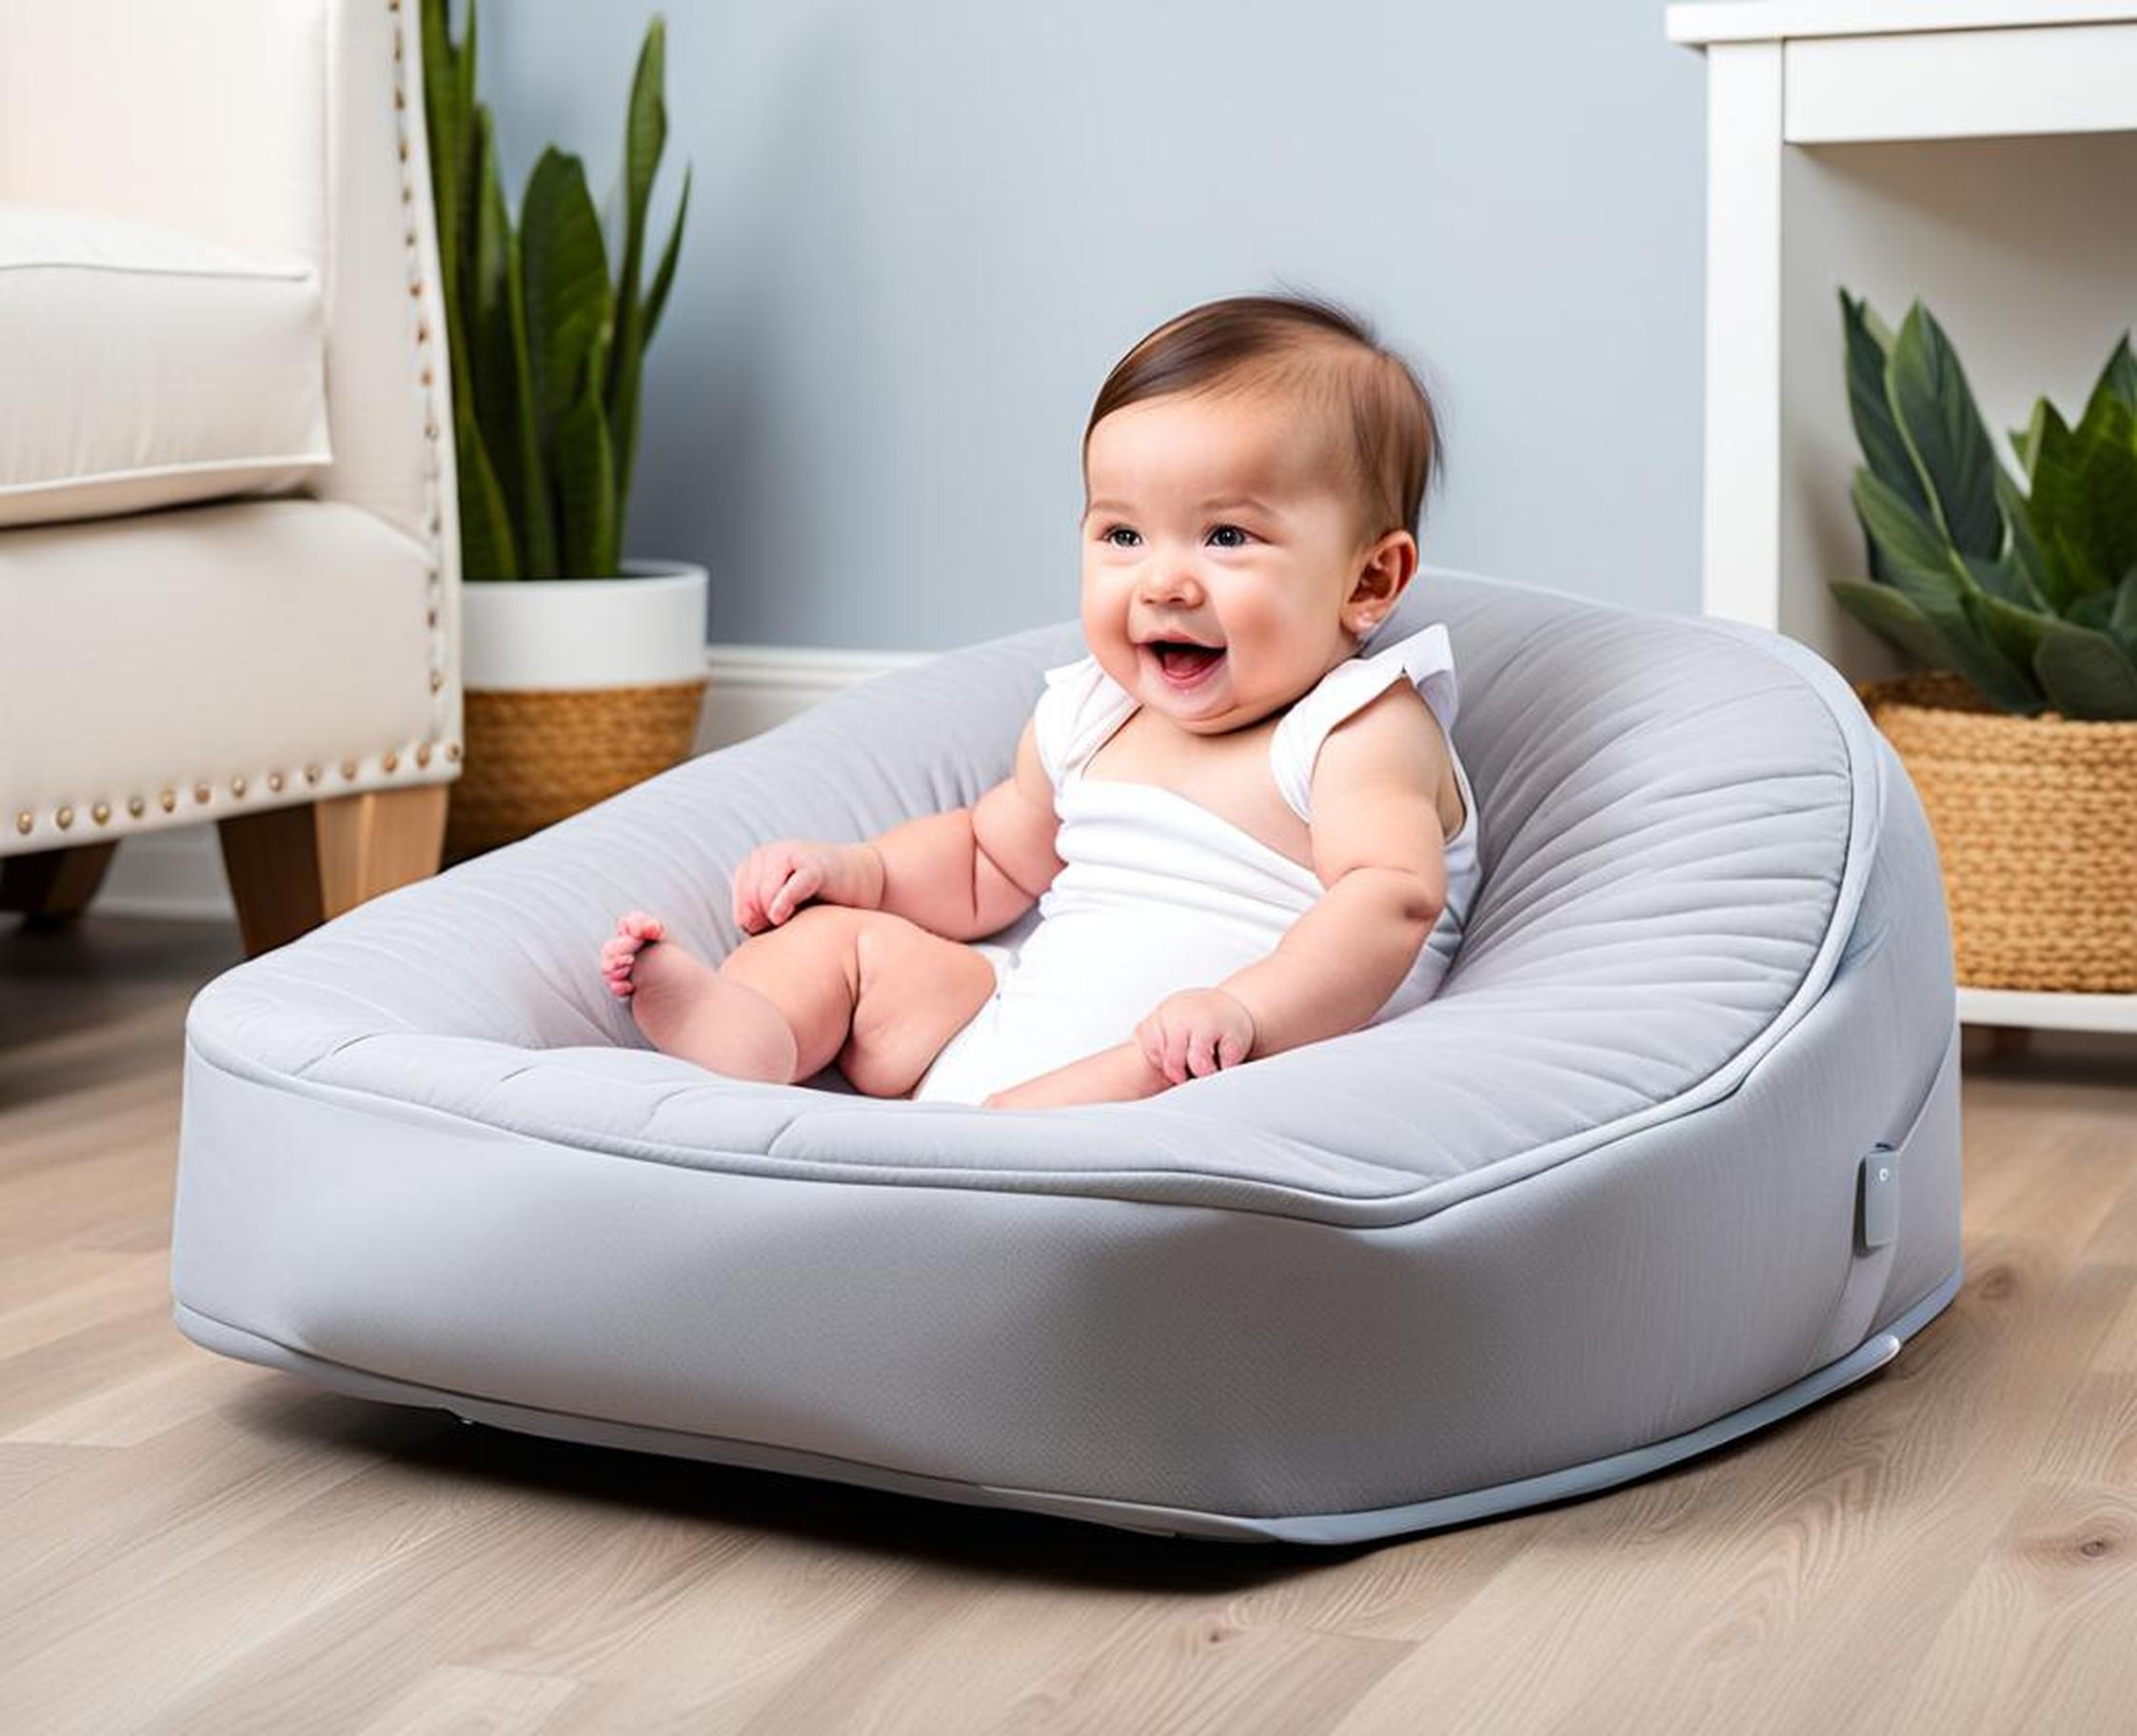 Recalled for Your Baby’s Safety? The Snuggle Me Lounger Controversy